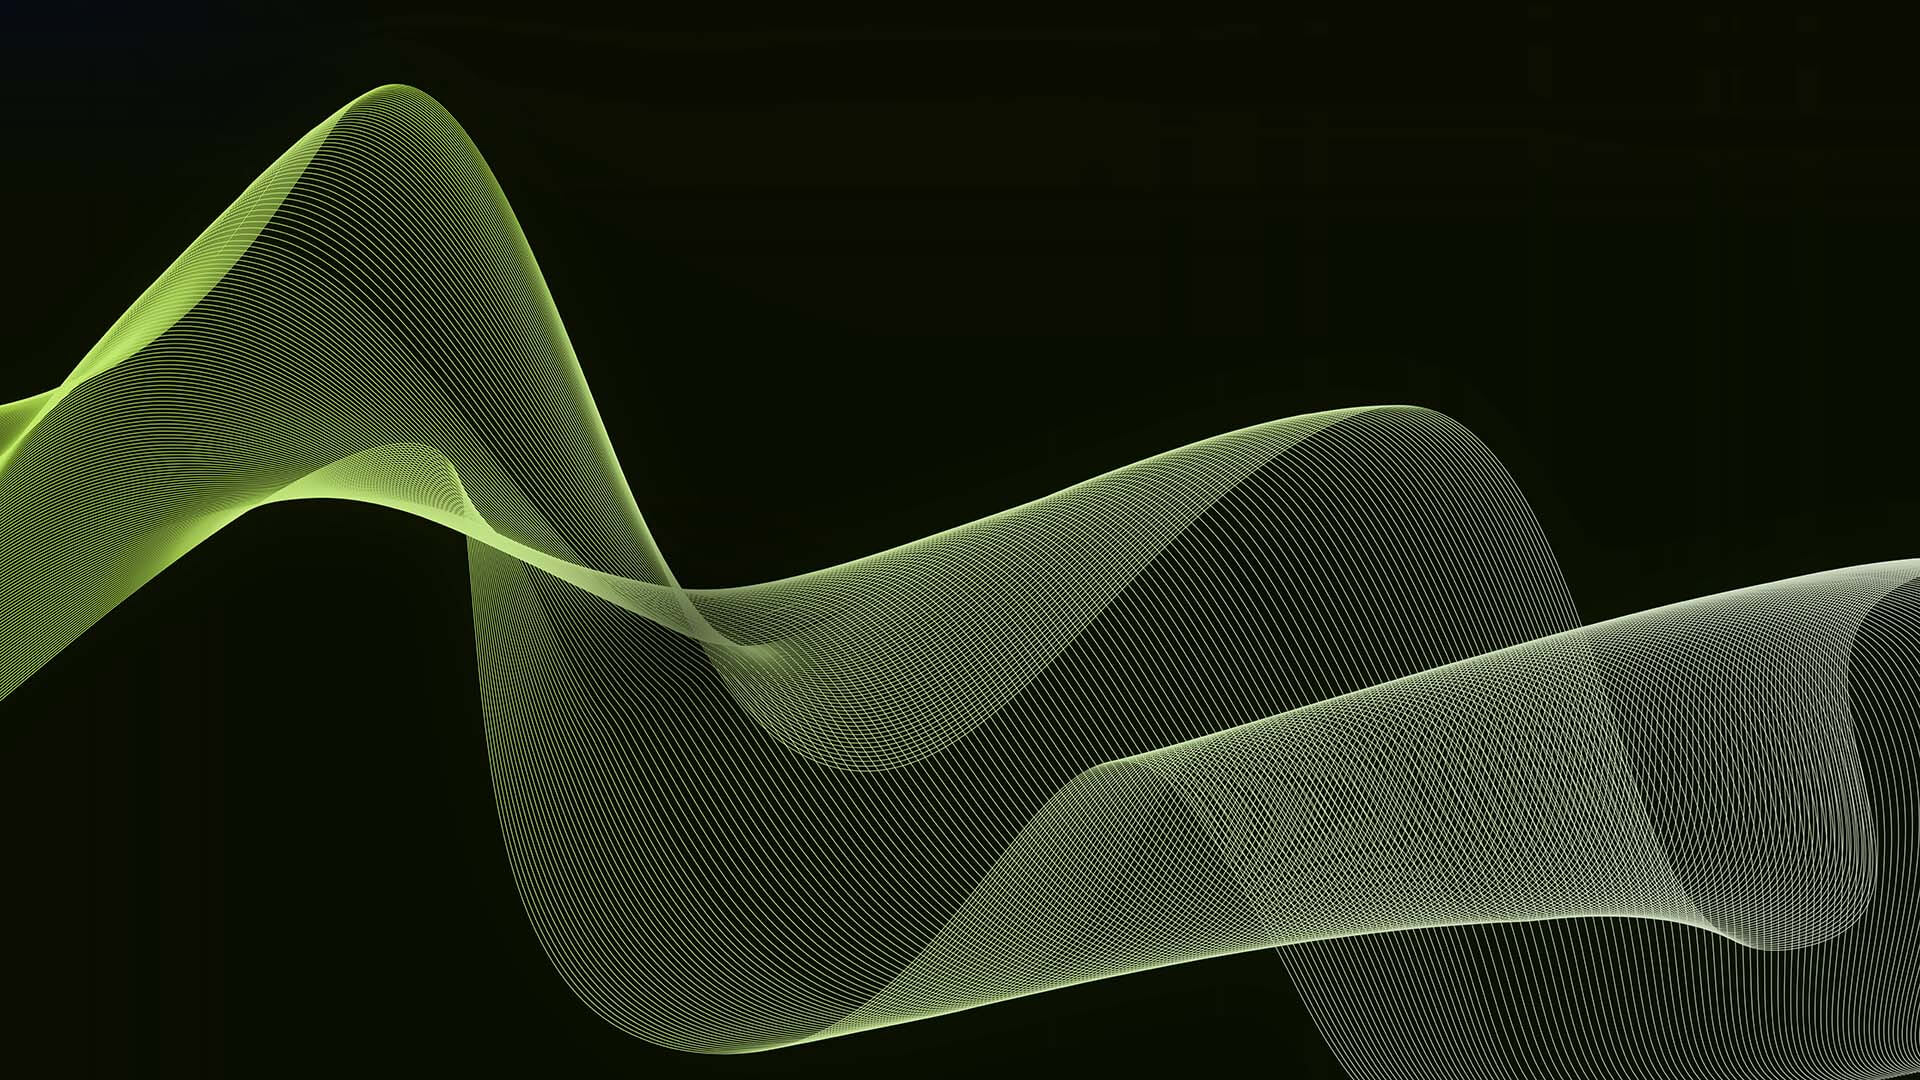 Green waves on a black background, illustrating the technology of Brainlab's Mint Medical